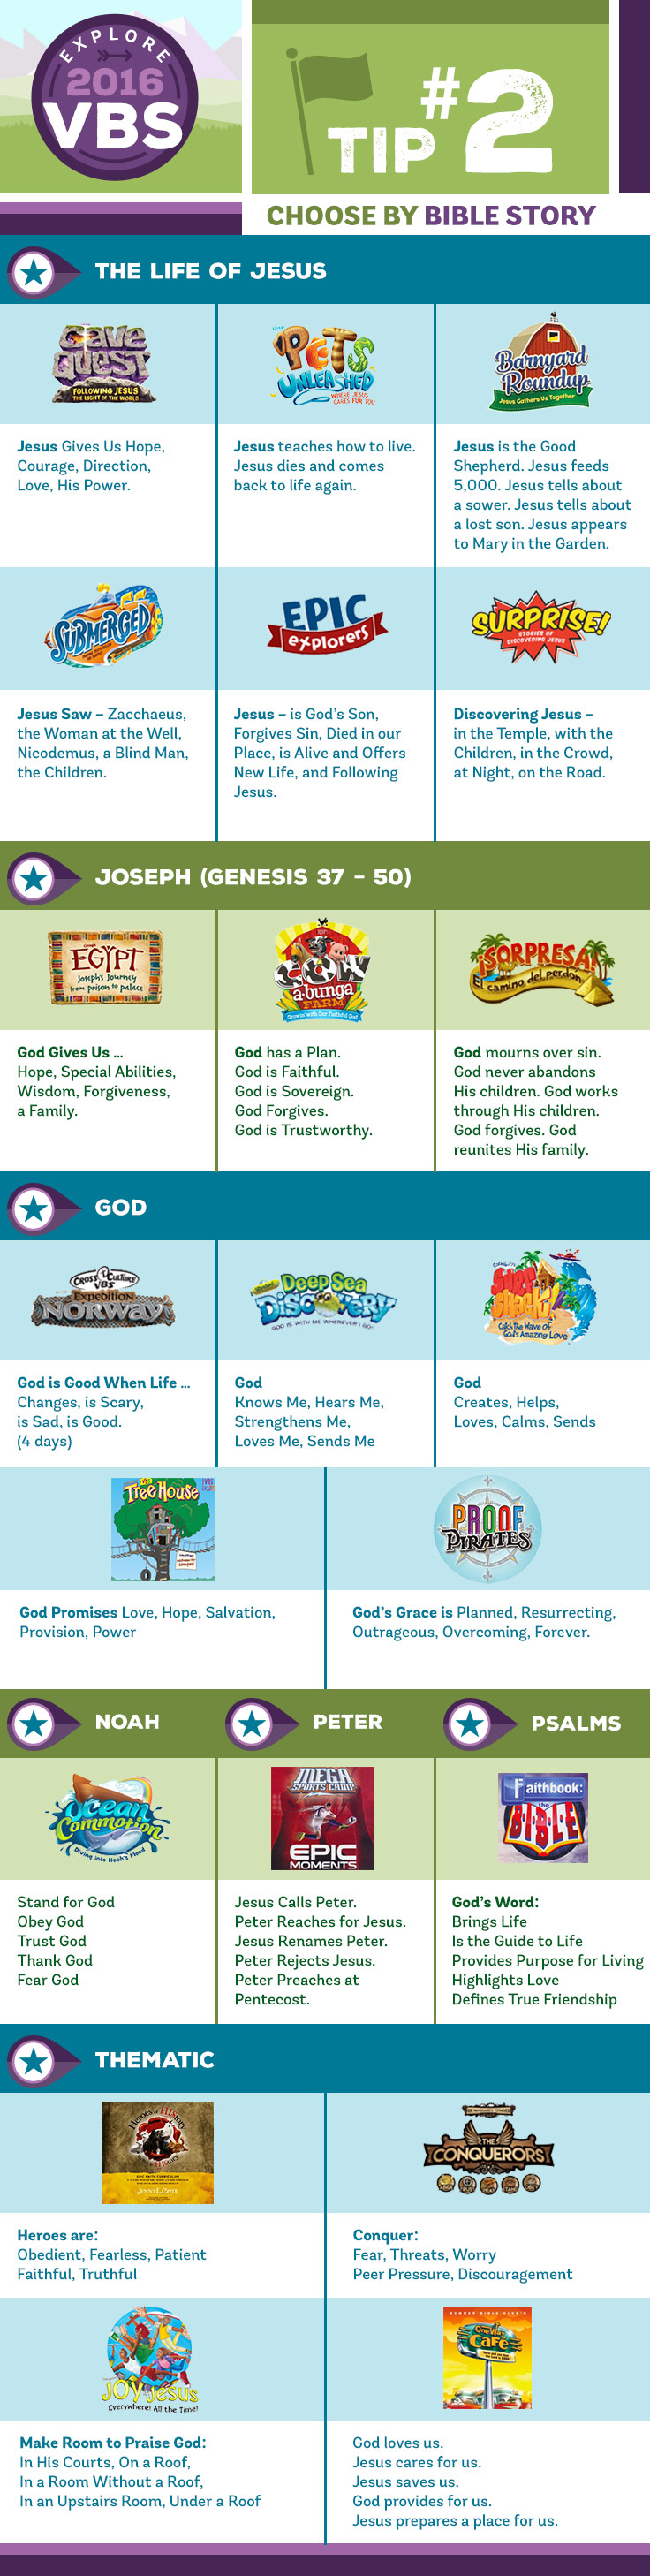 VBS Tip #2: Choose by Bible Story